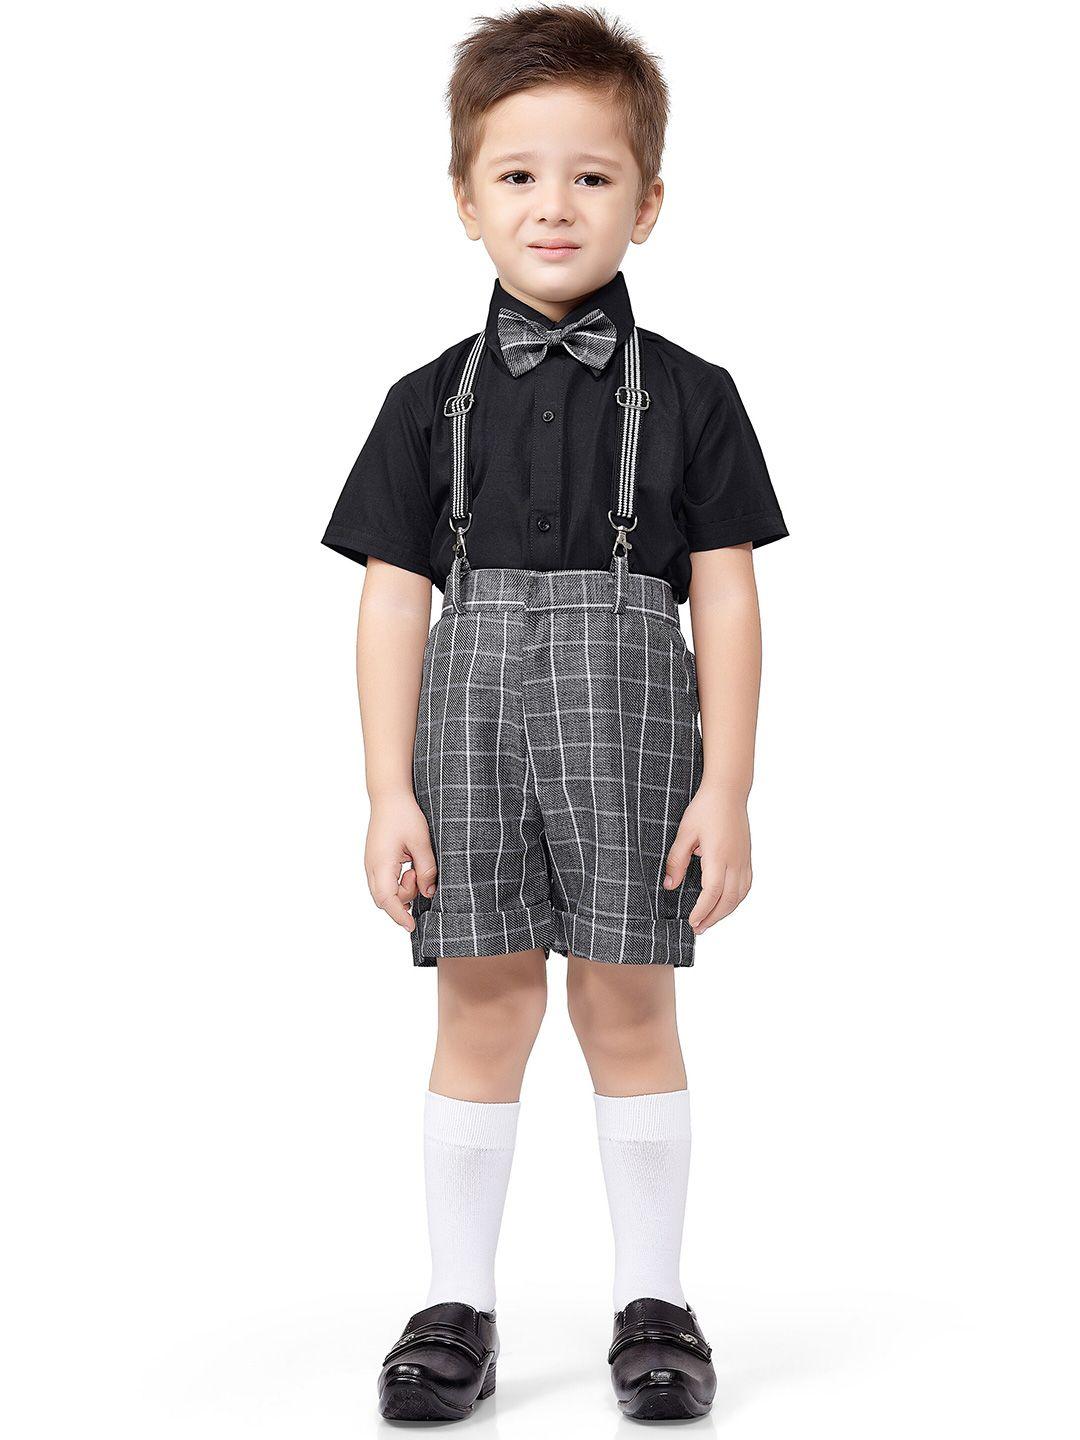 jeetethnics boys grey & black shirt with shorts and suspenders